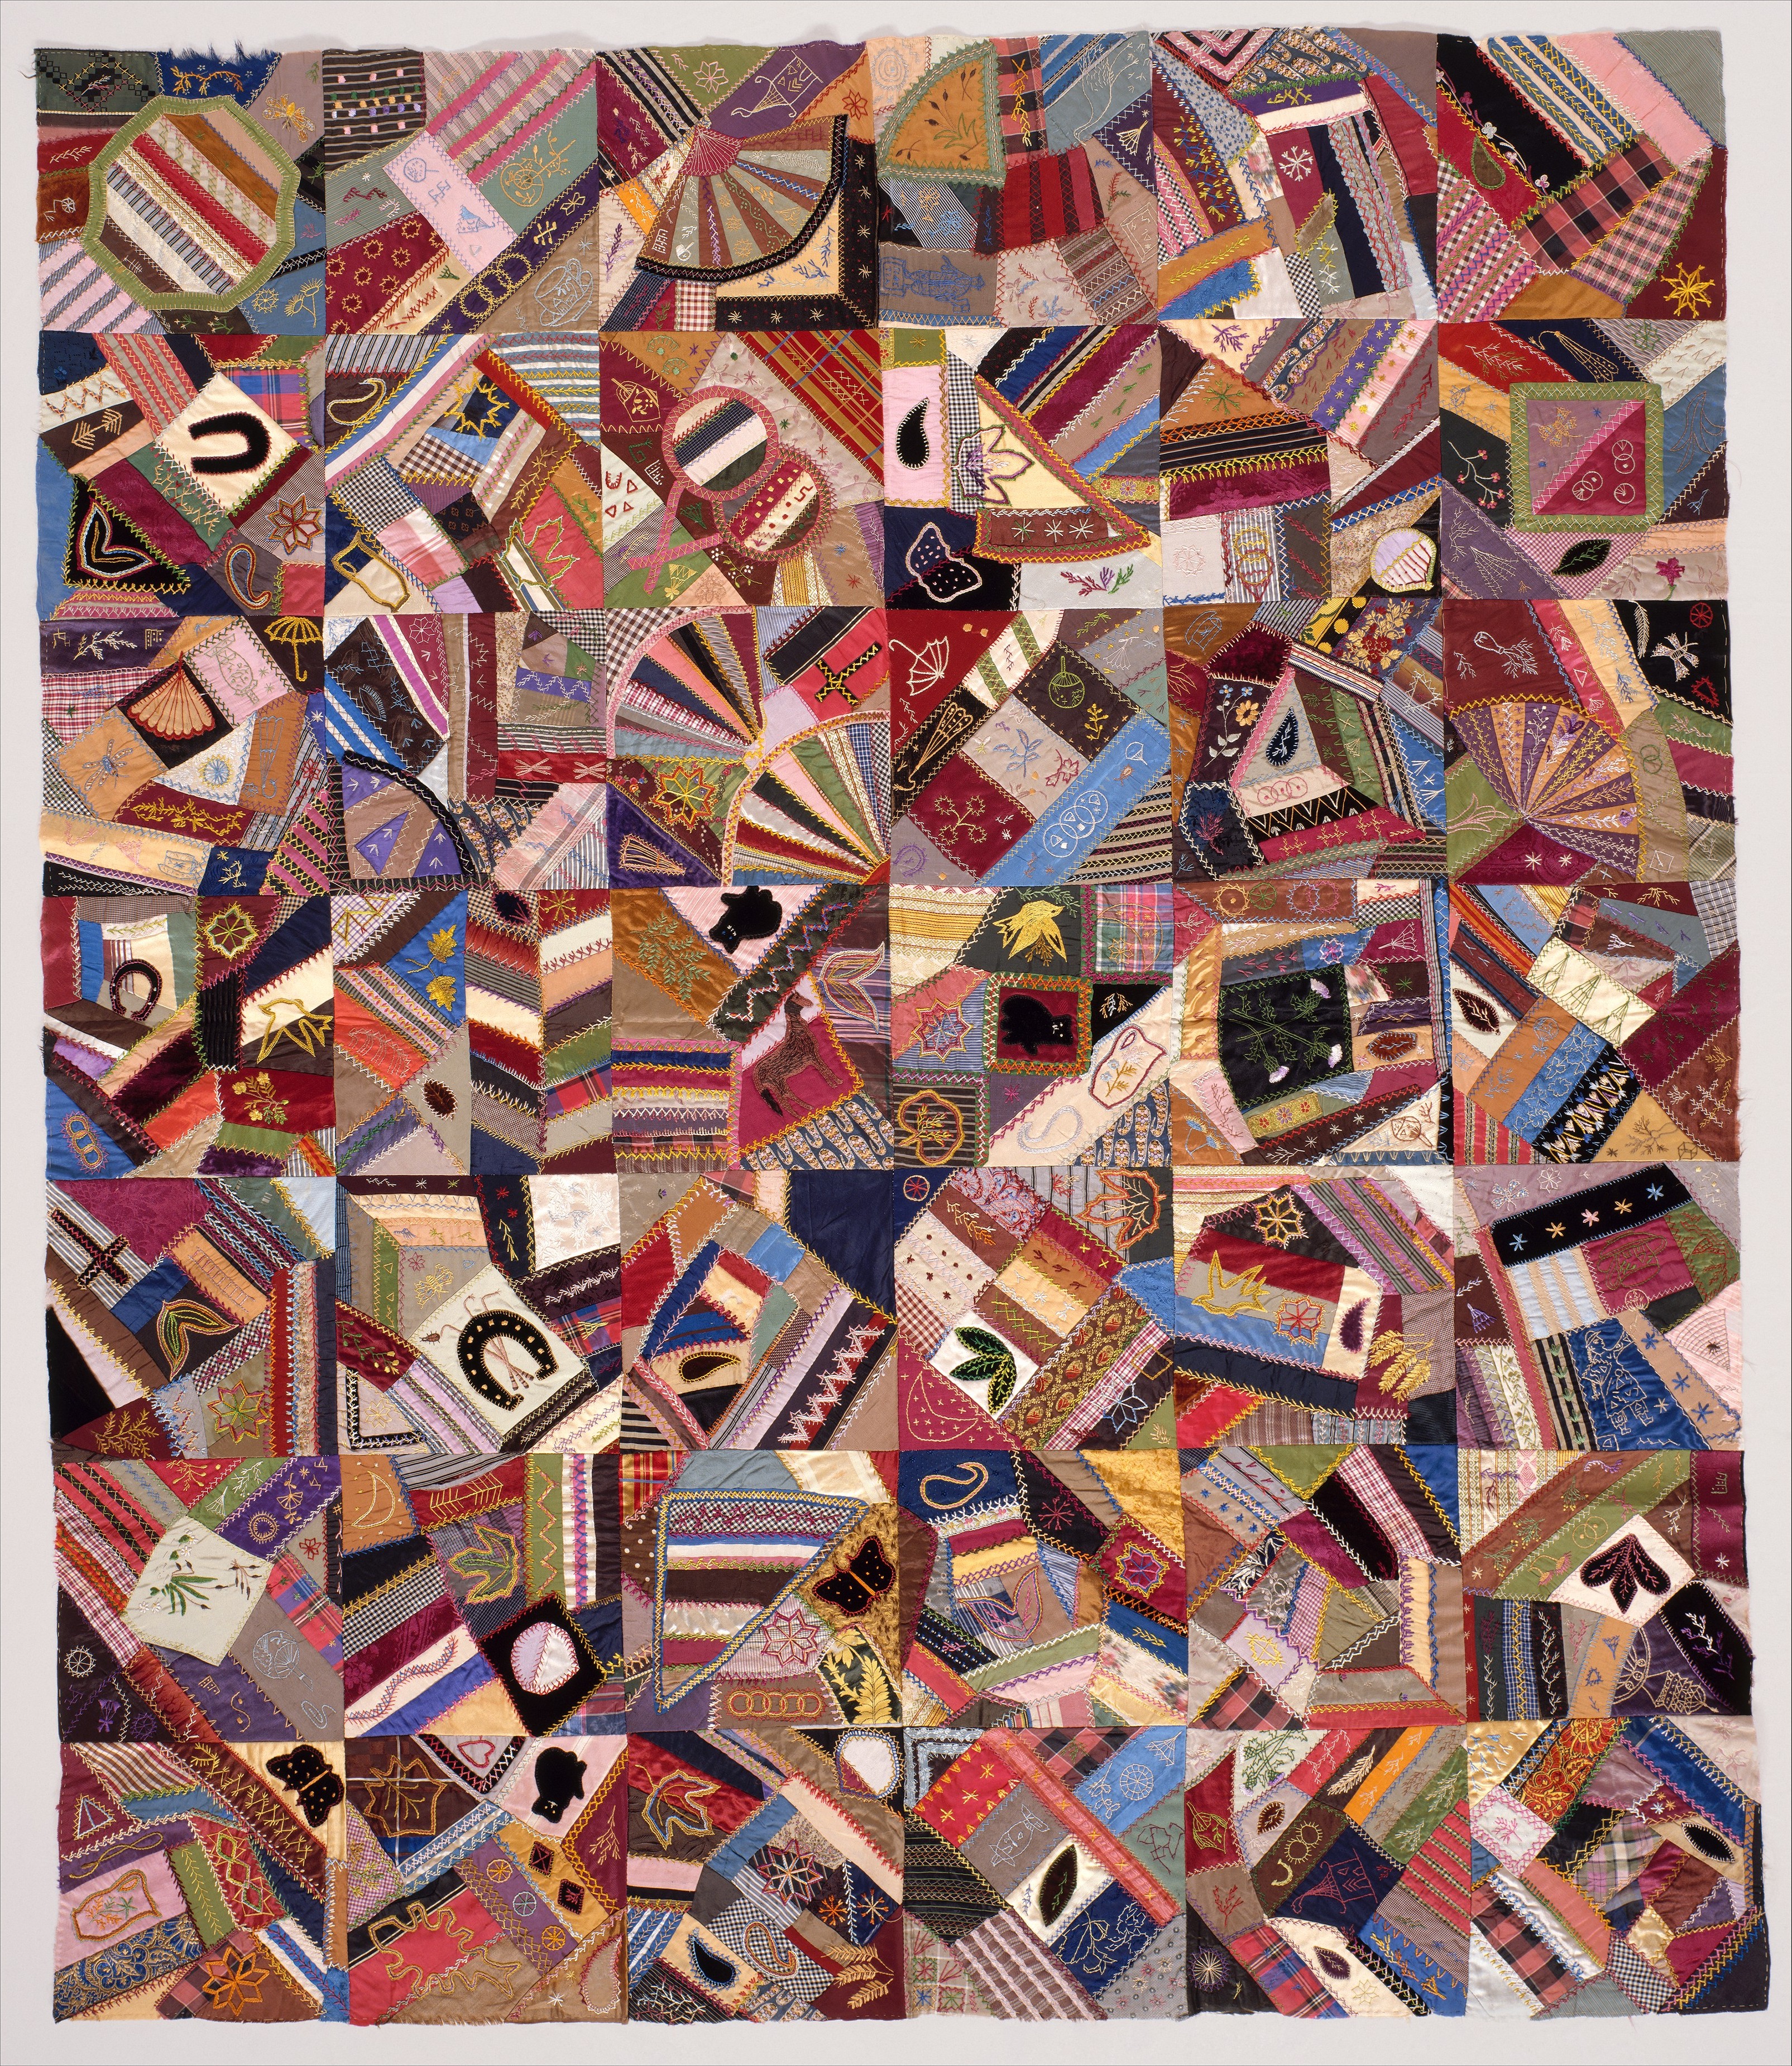 Quilt Top, Crazy Pattern by Unknown Artist - aprox. 1885 - 154.3 x 132.1 cm 